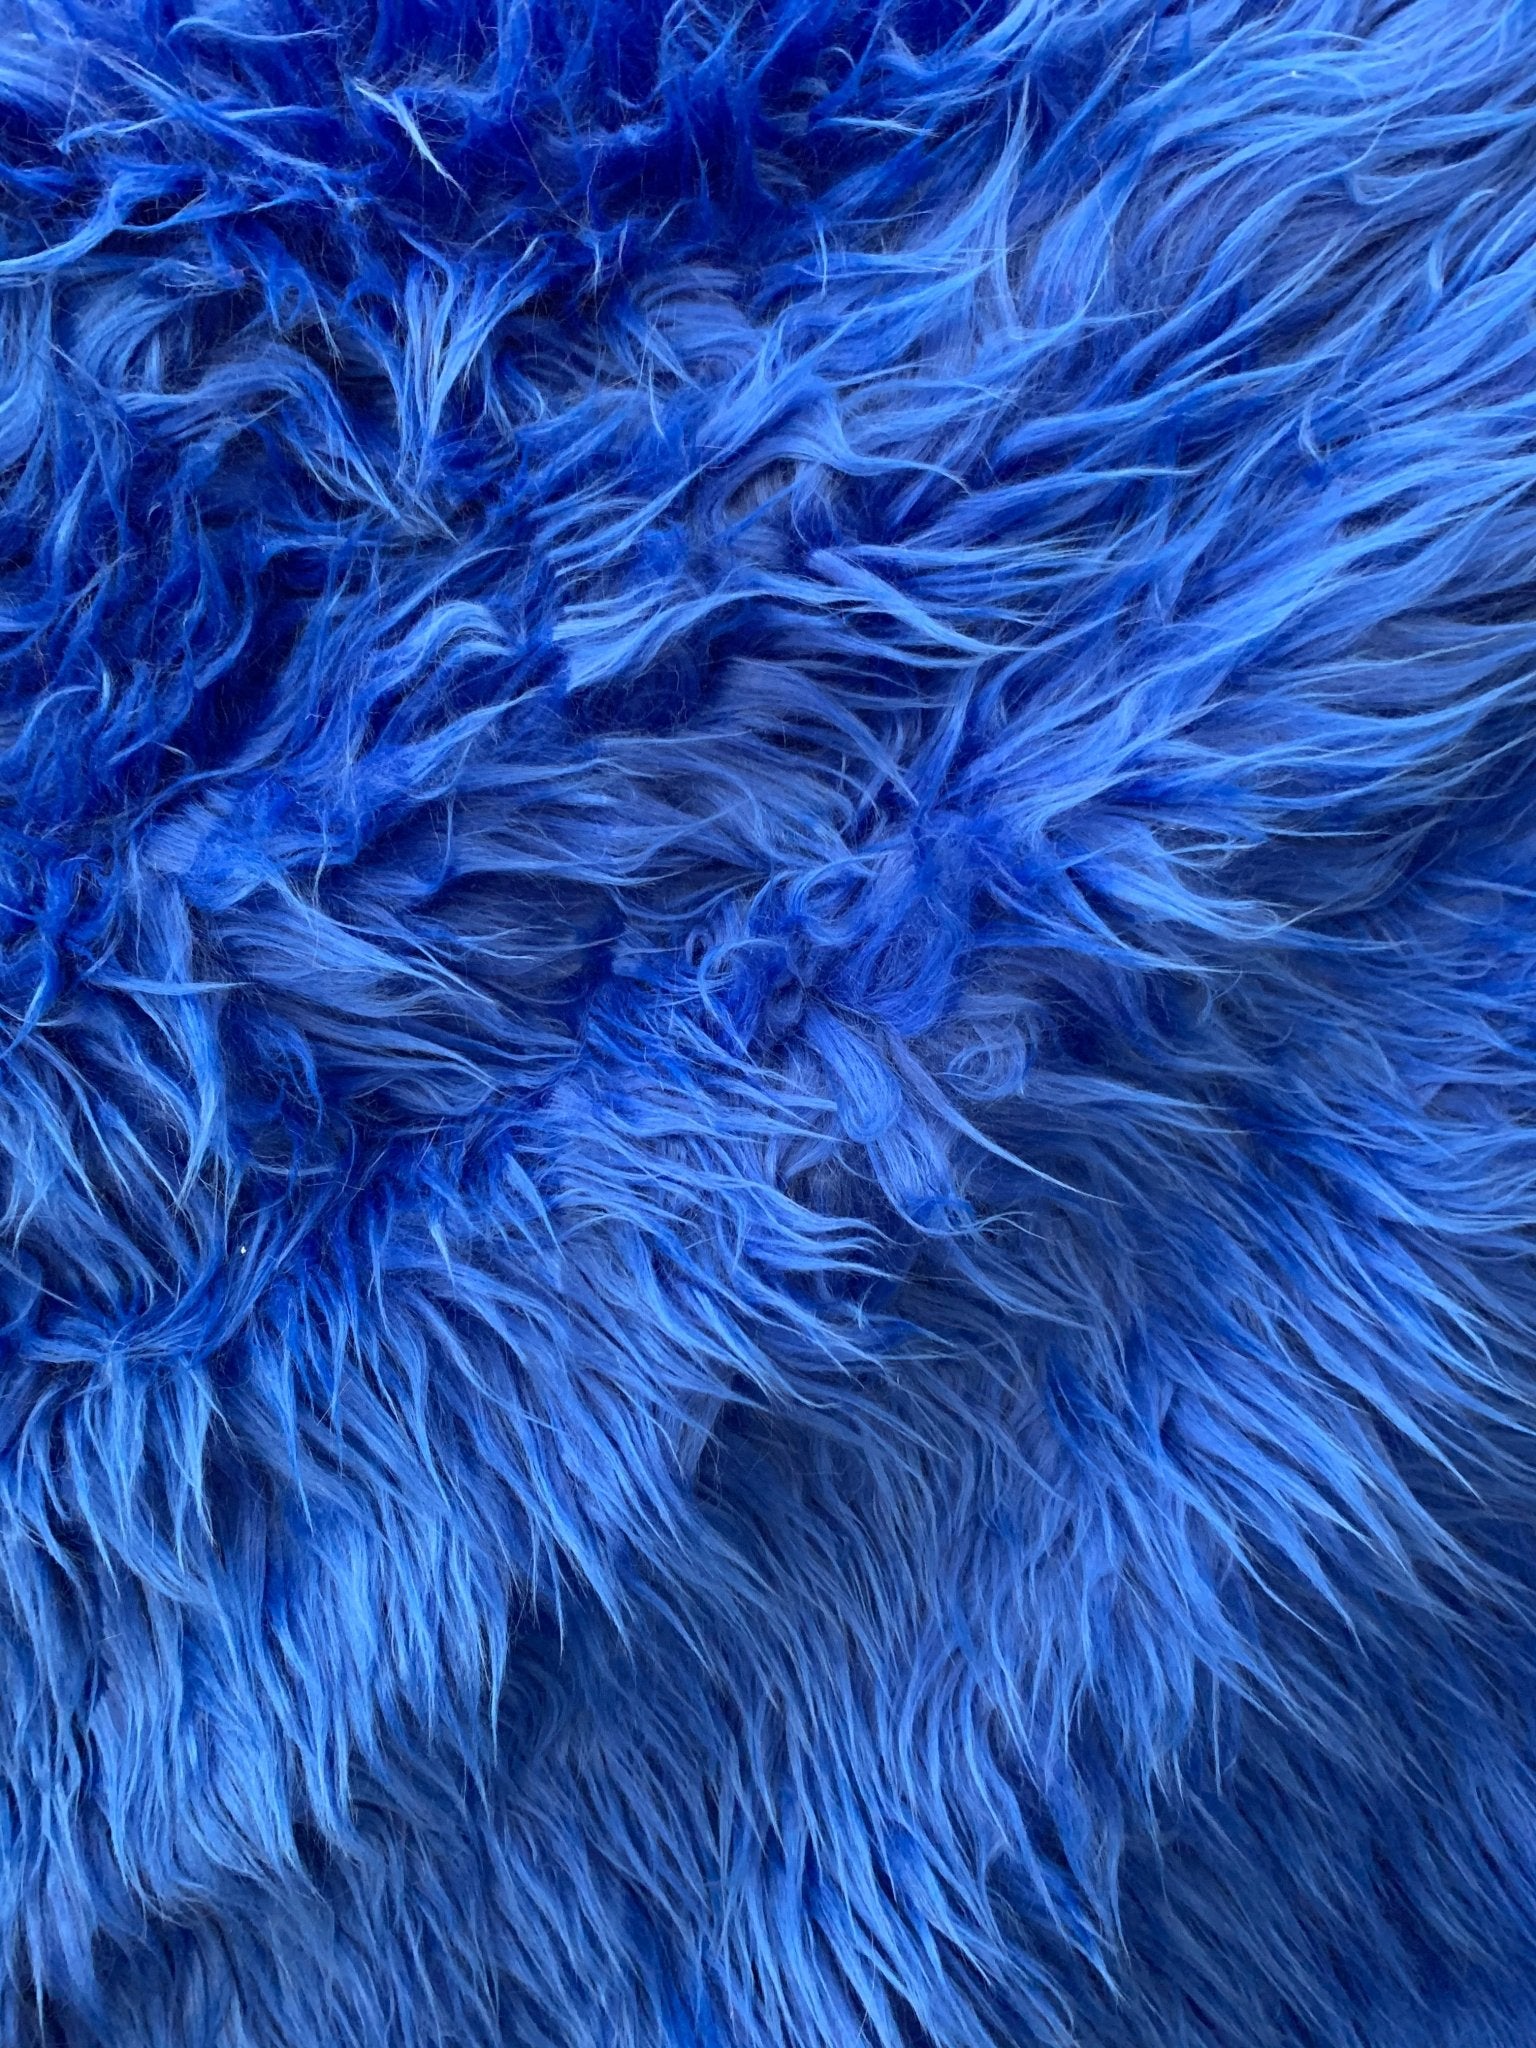 Mongolian Long Pile Fake Faux Fur Fabric Sold By The YardICEFABRICICE FABRICSRoyal BlueBy The Yard (60 inches Wide)Mongolian Long Pile Fake Faux Fur Fabric Sold By The Yard ICEFABRIC